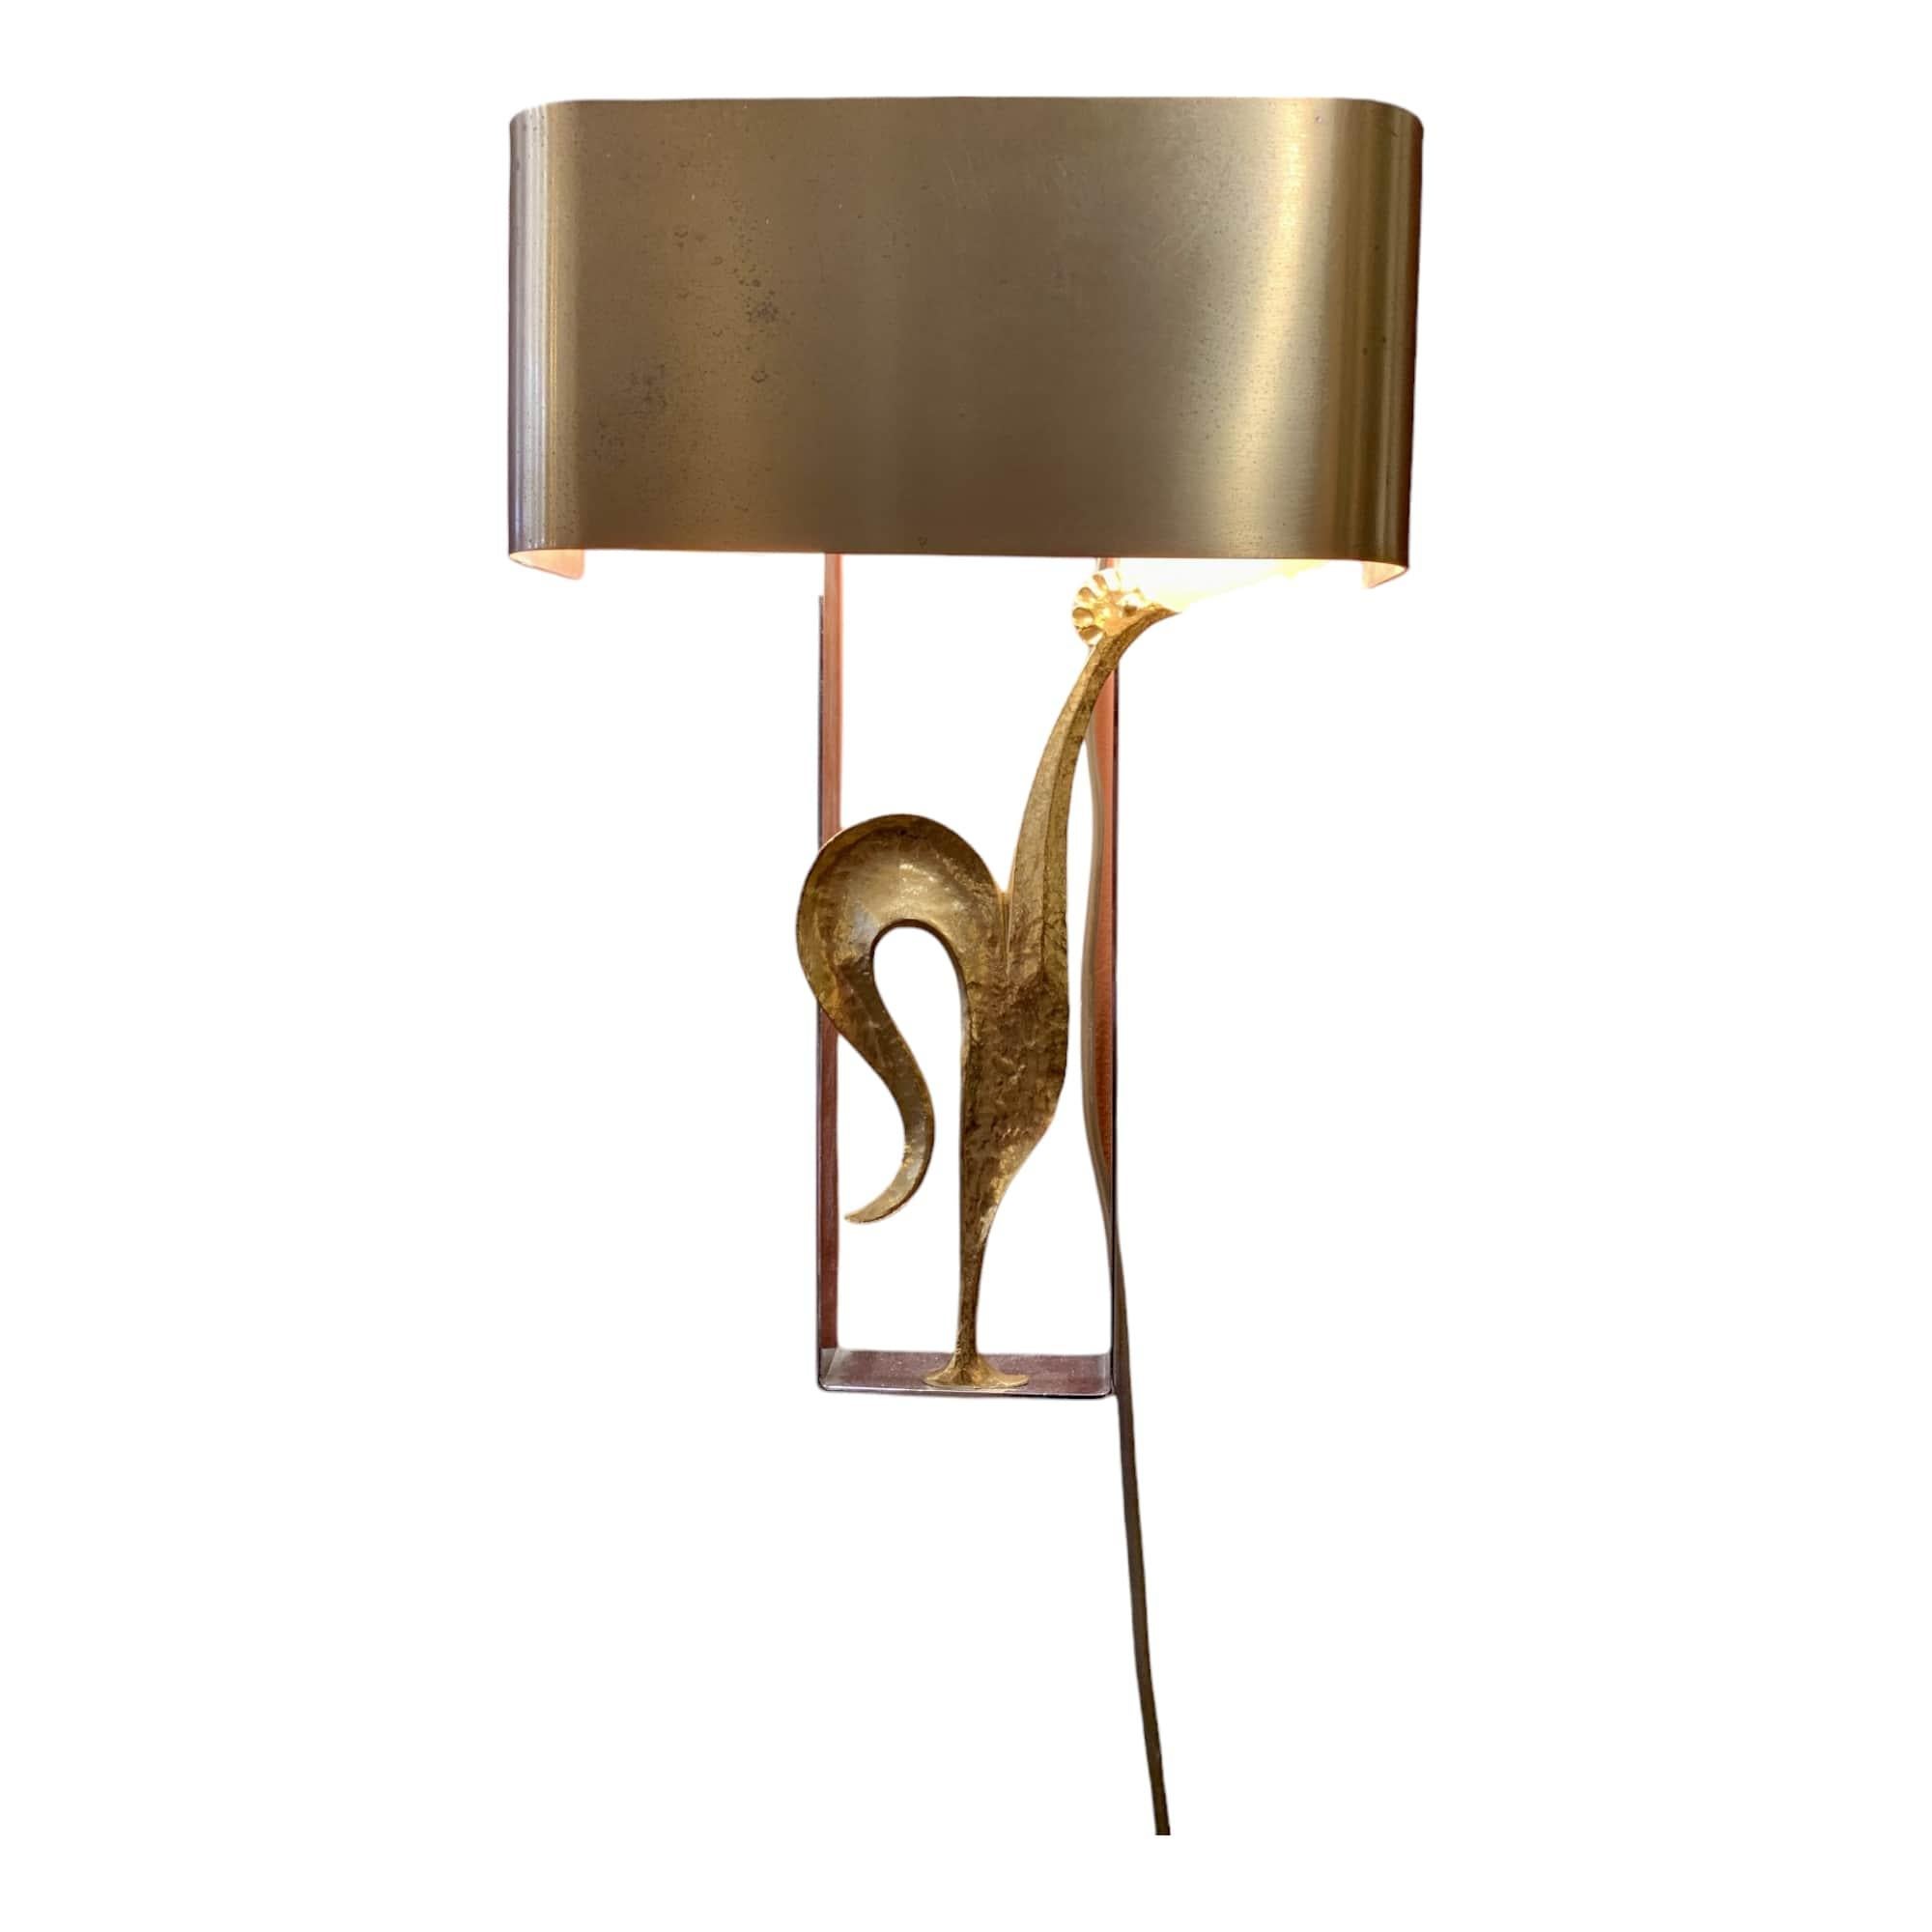 This delightful pair of wall lights, “Coq” model, is a true treasure from Maison Charles. Made from gilded brass, these stunning antiques from France were designed around 1970. Their elegant and refined design will bring a touch of sophistication to